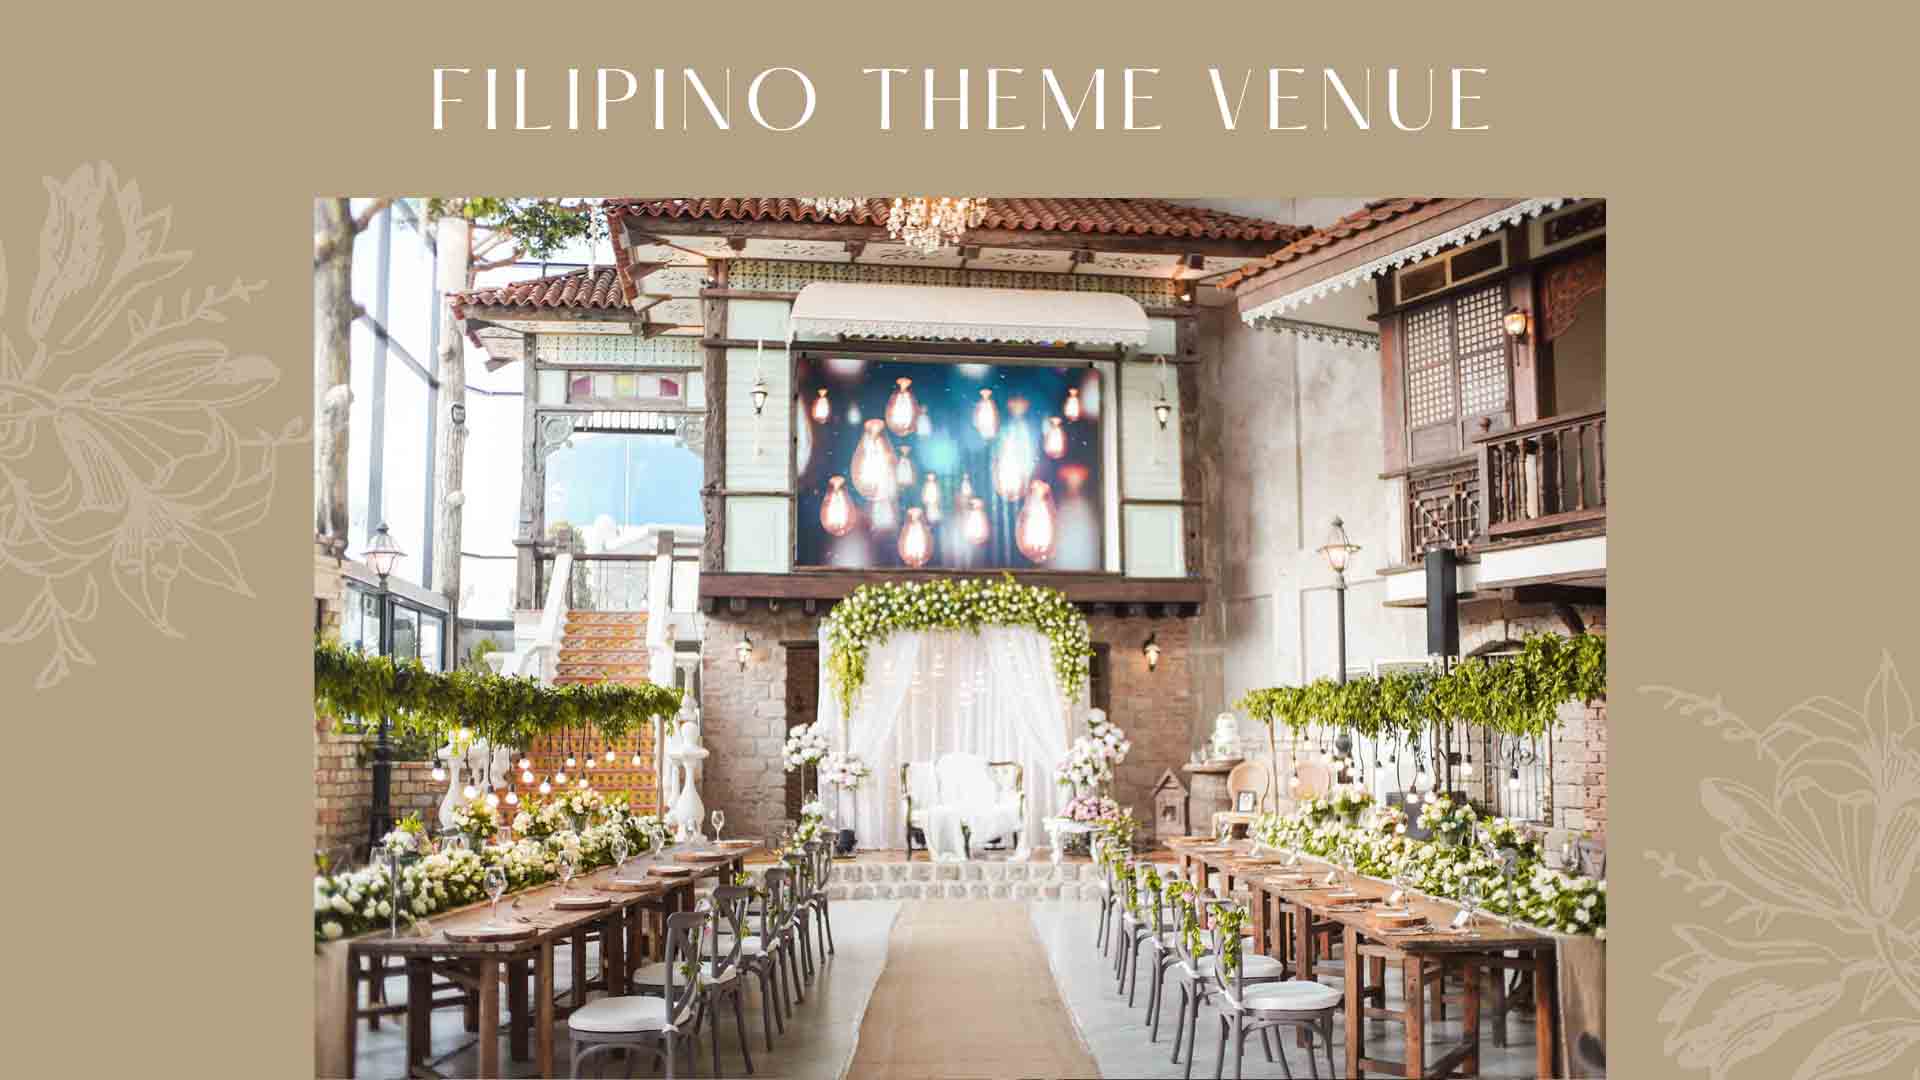 Town's Delight Catering & Events Filipinana Wedding Guide Philippines 2